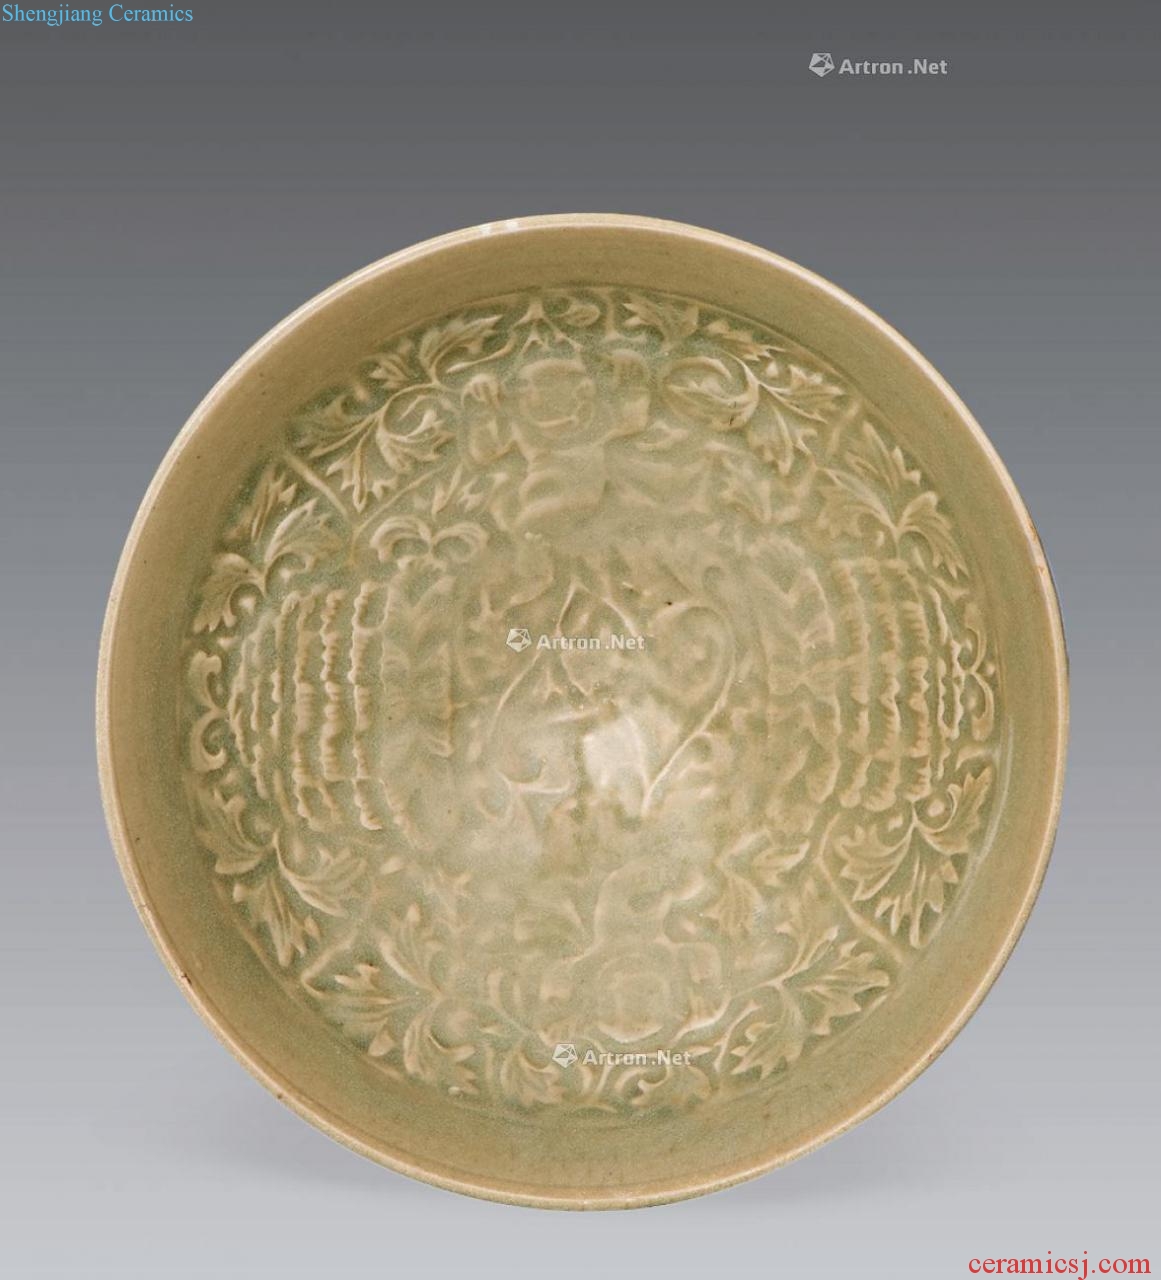 Northern song dynasty yao state baby bowl